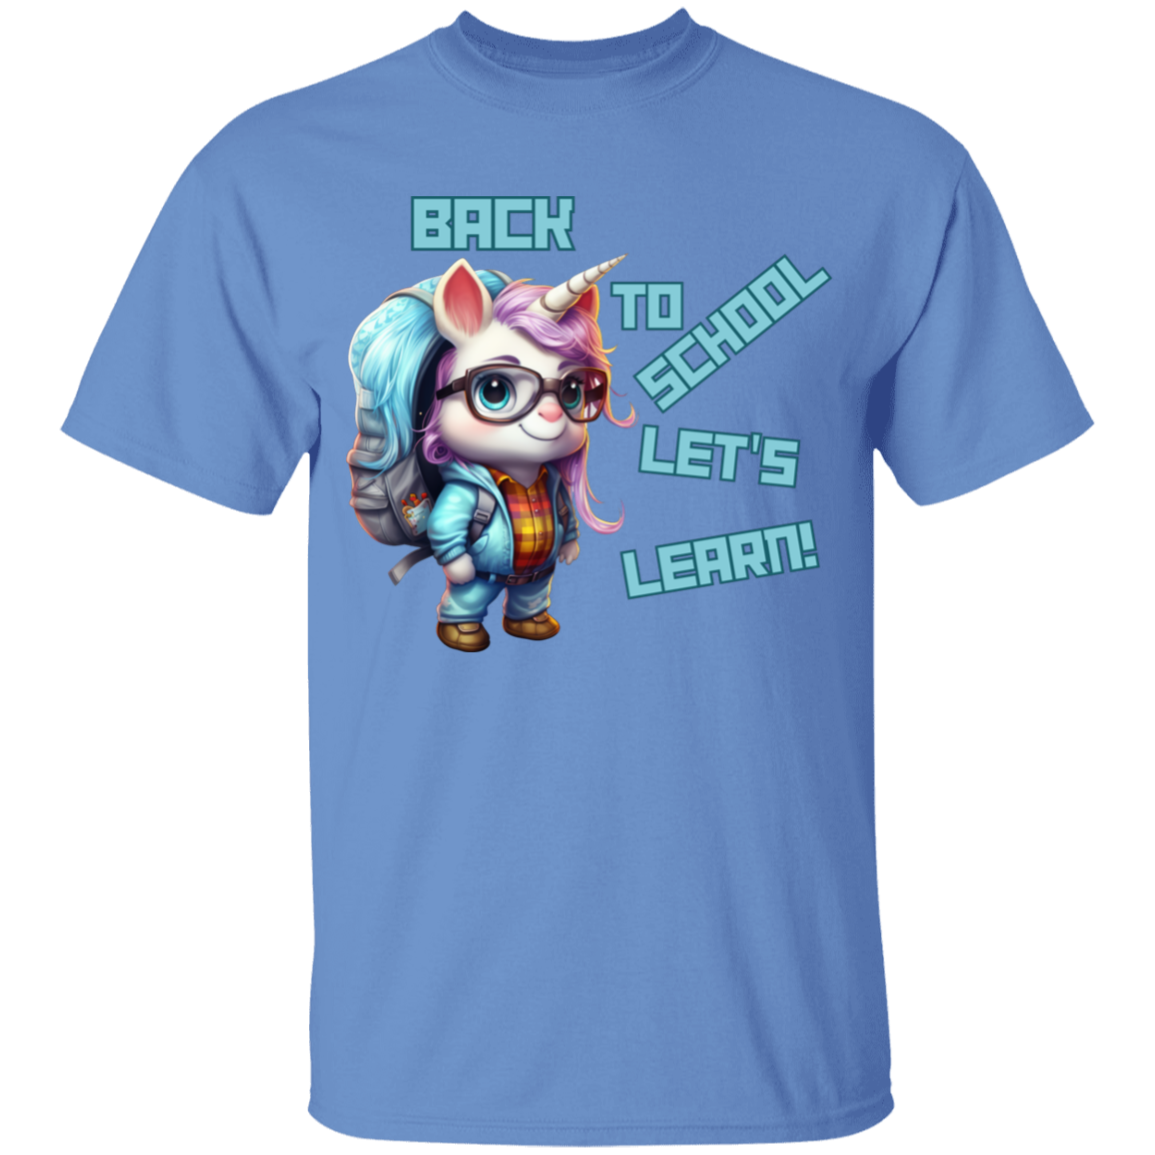 Back to School Let's Learn T-Shirt: Adorable Unicorn Cartoon for Youth